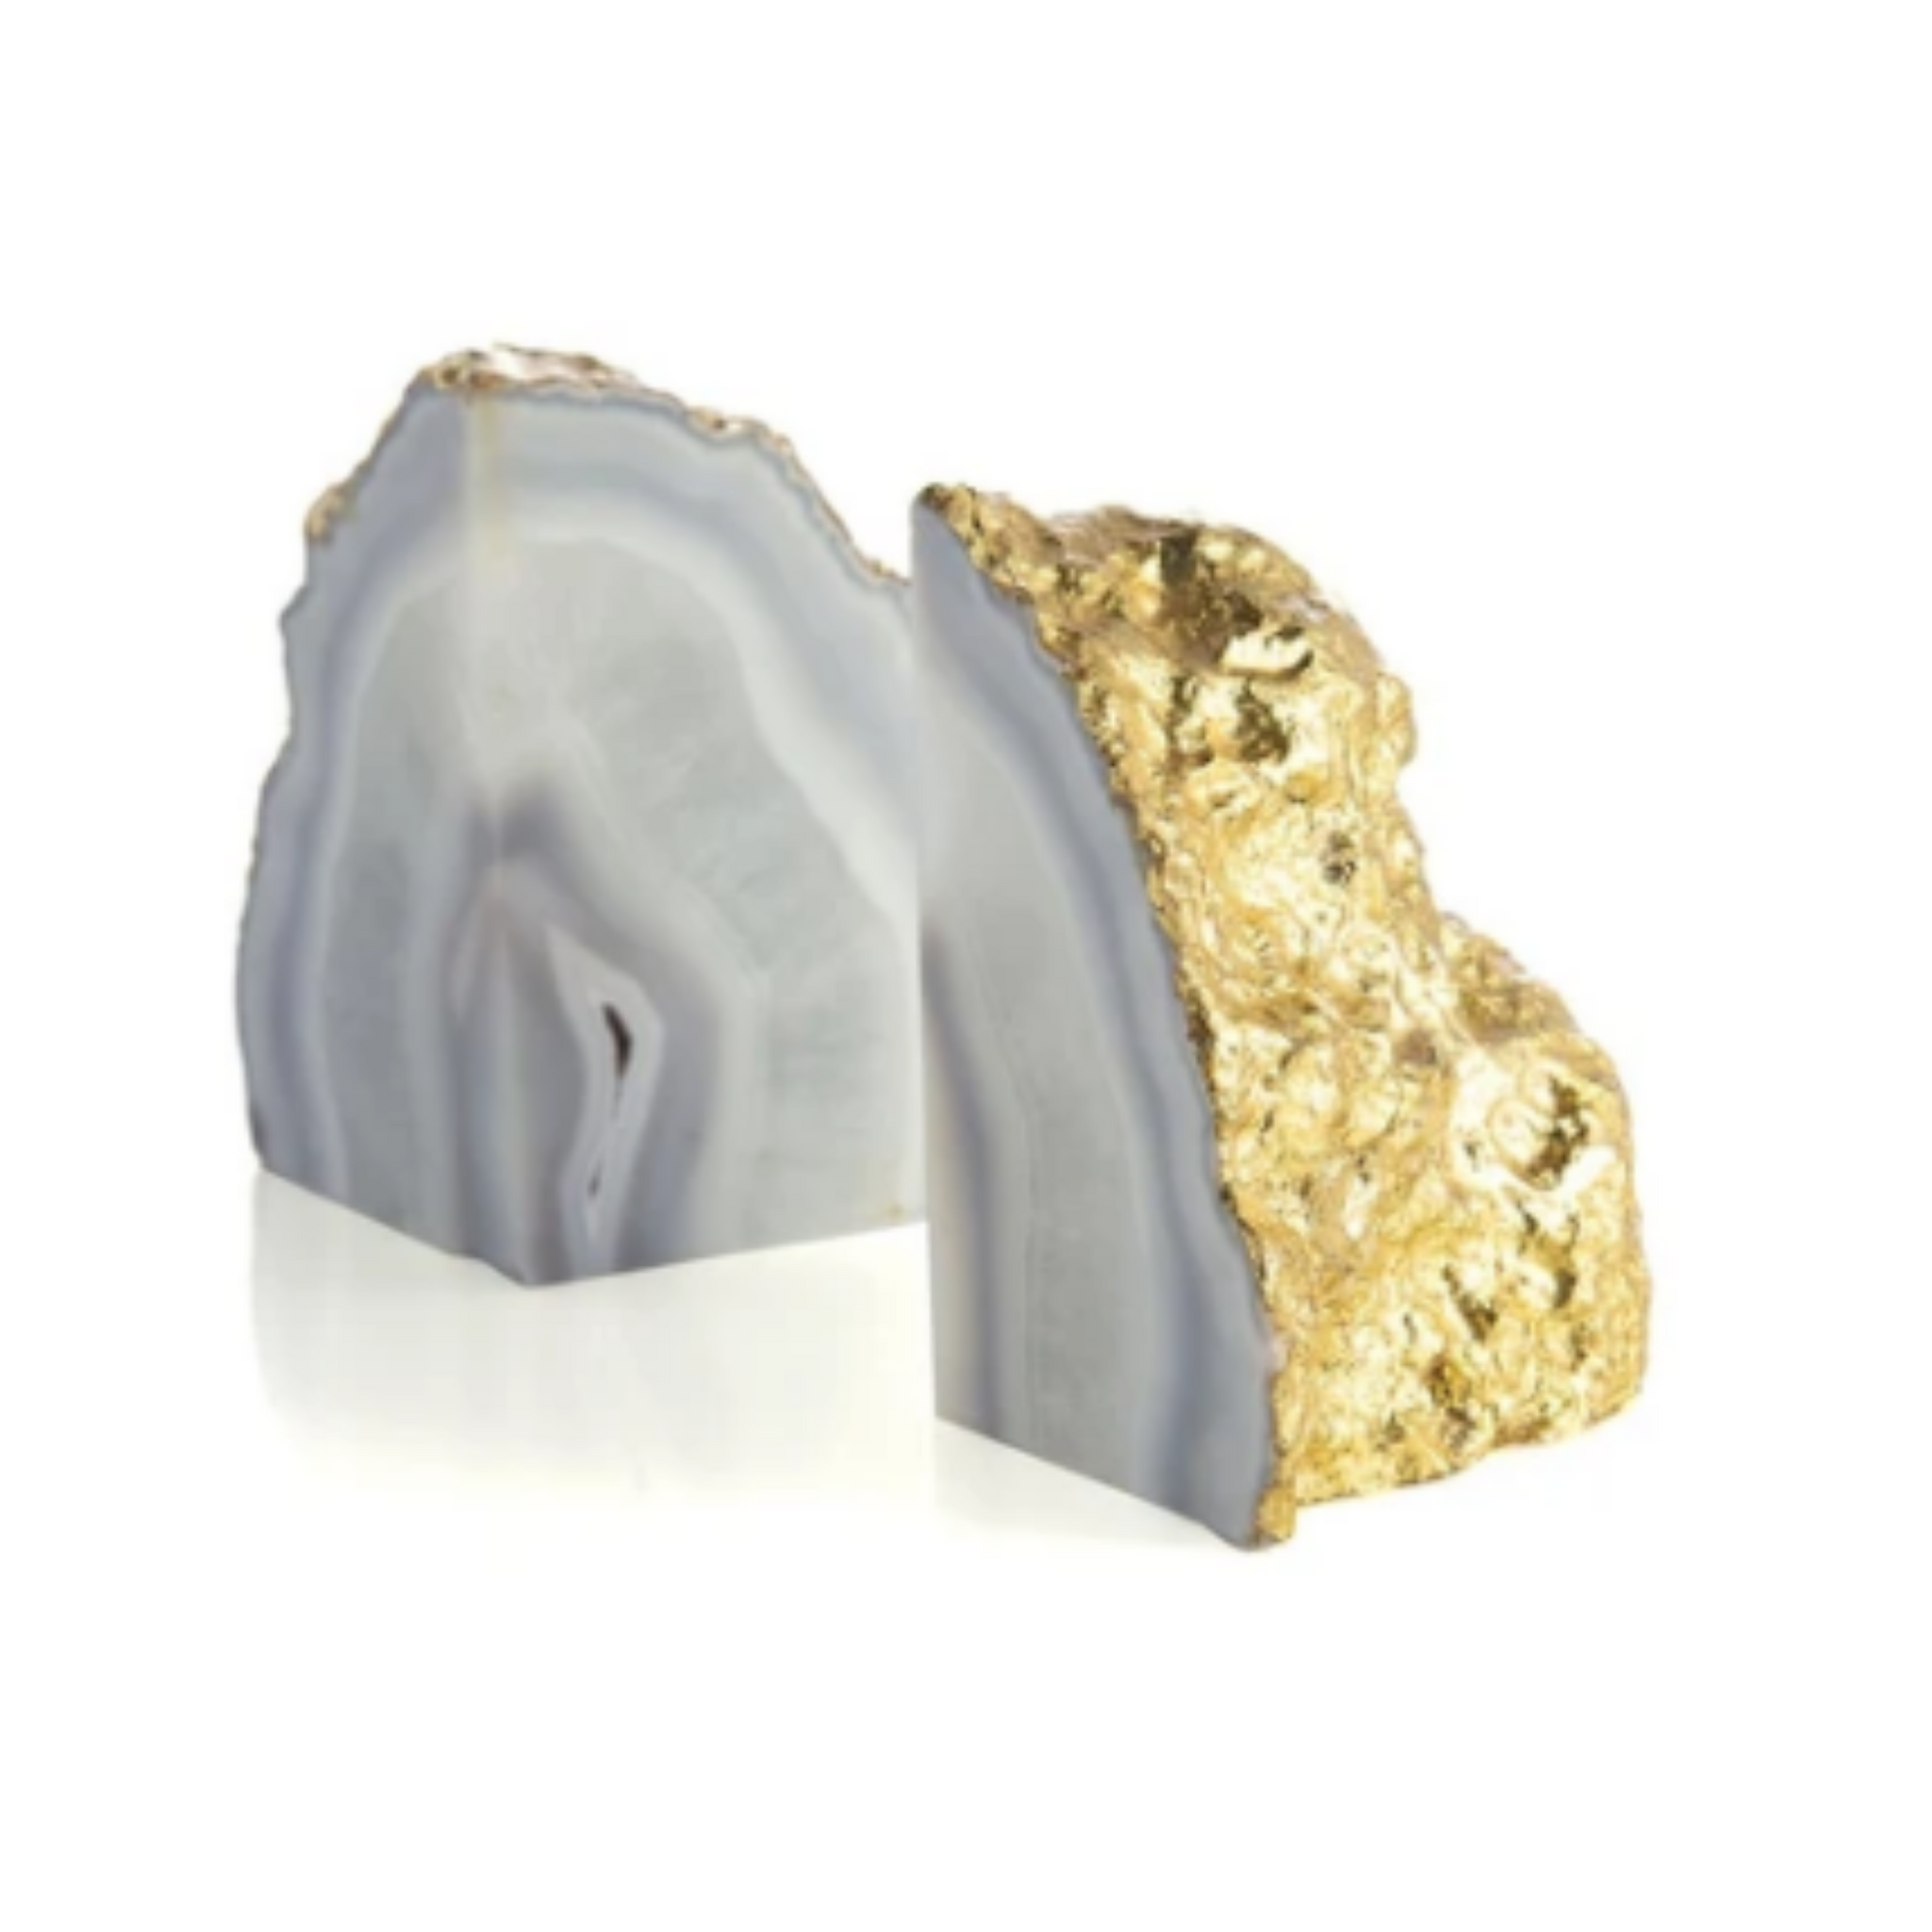 Agate Bookends (Sold Individually)